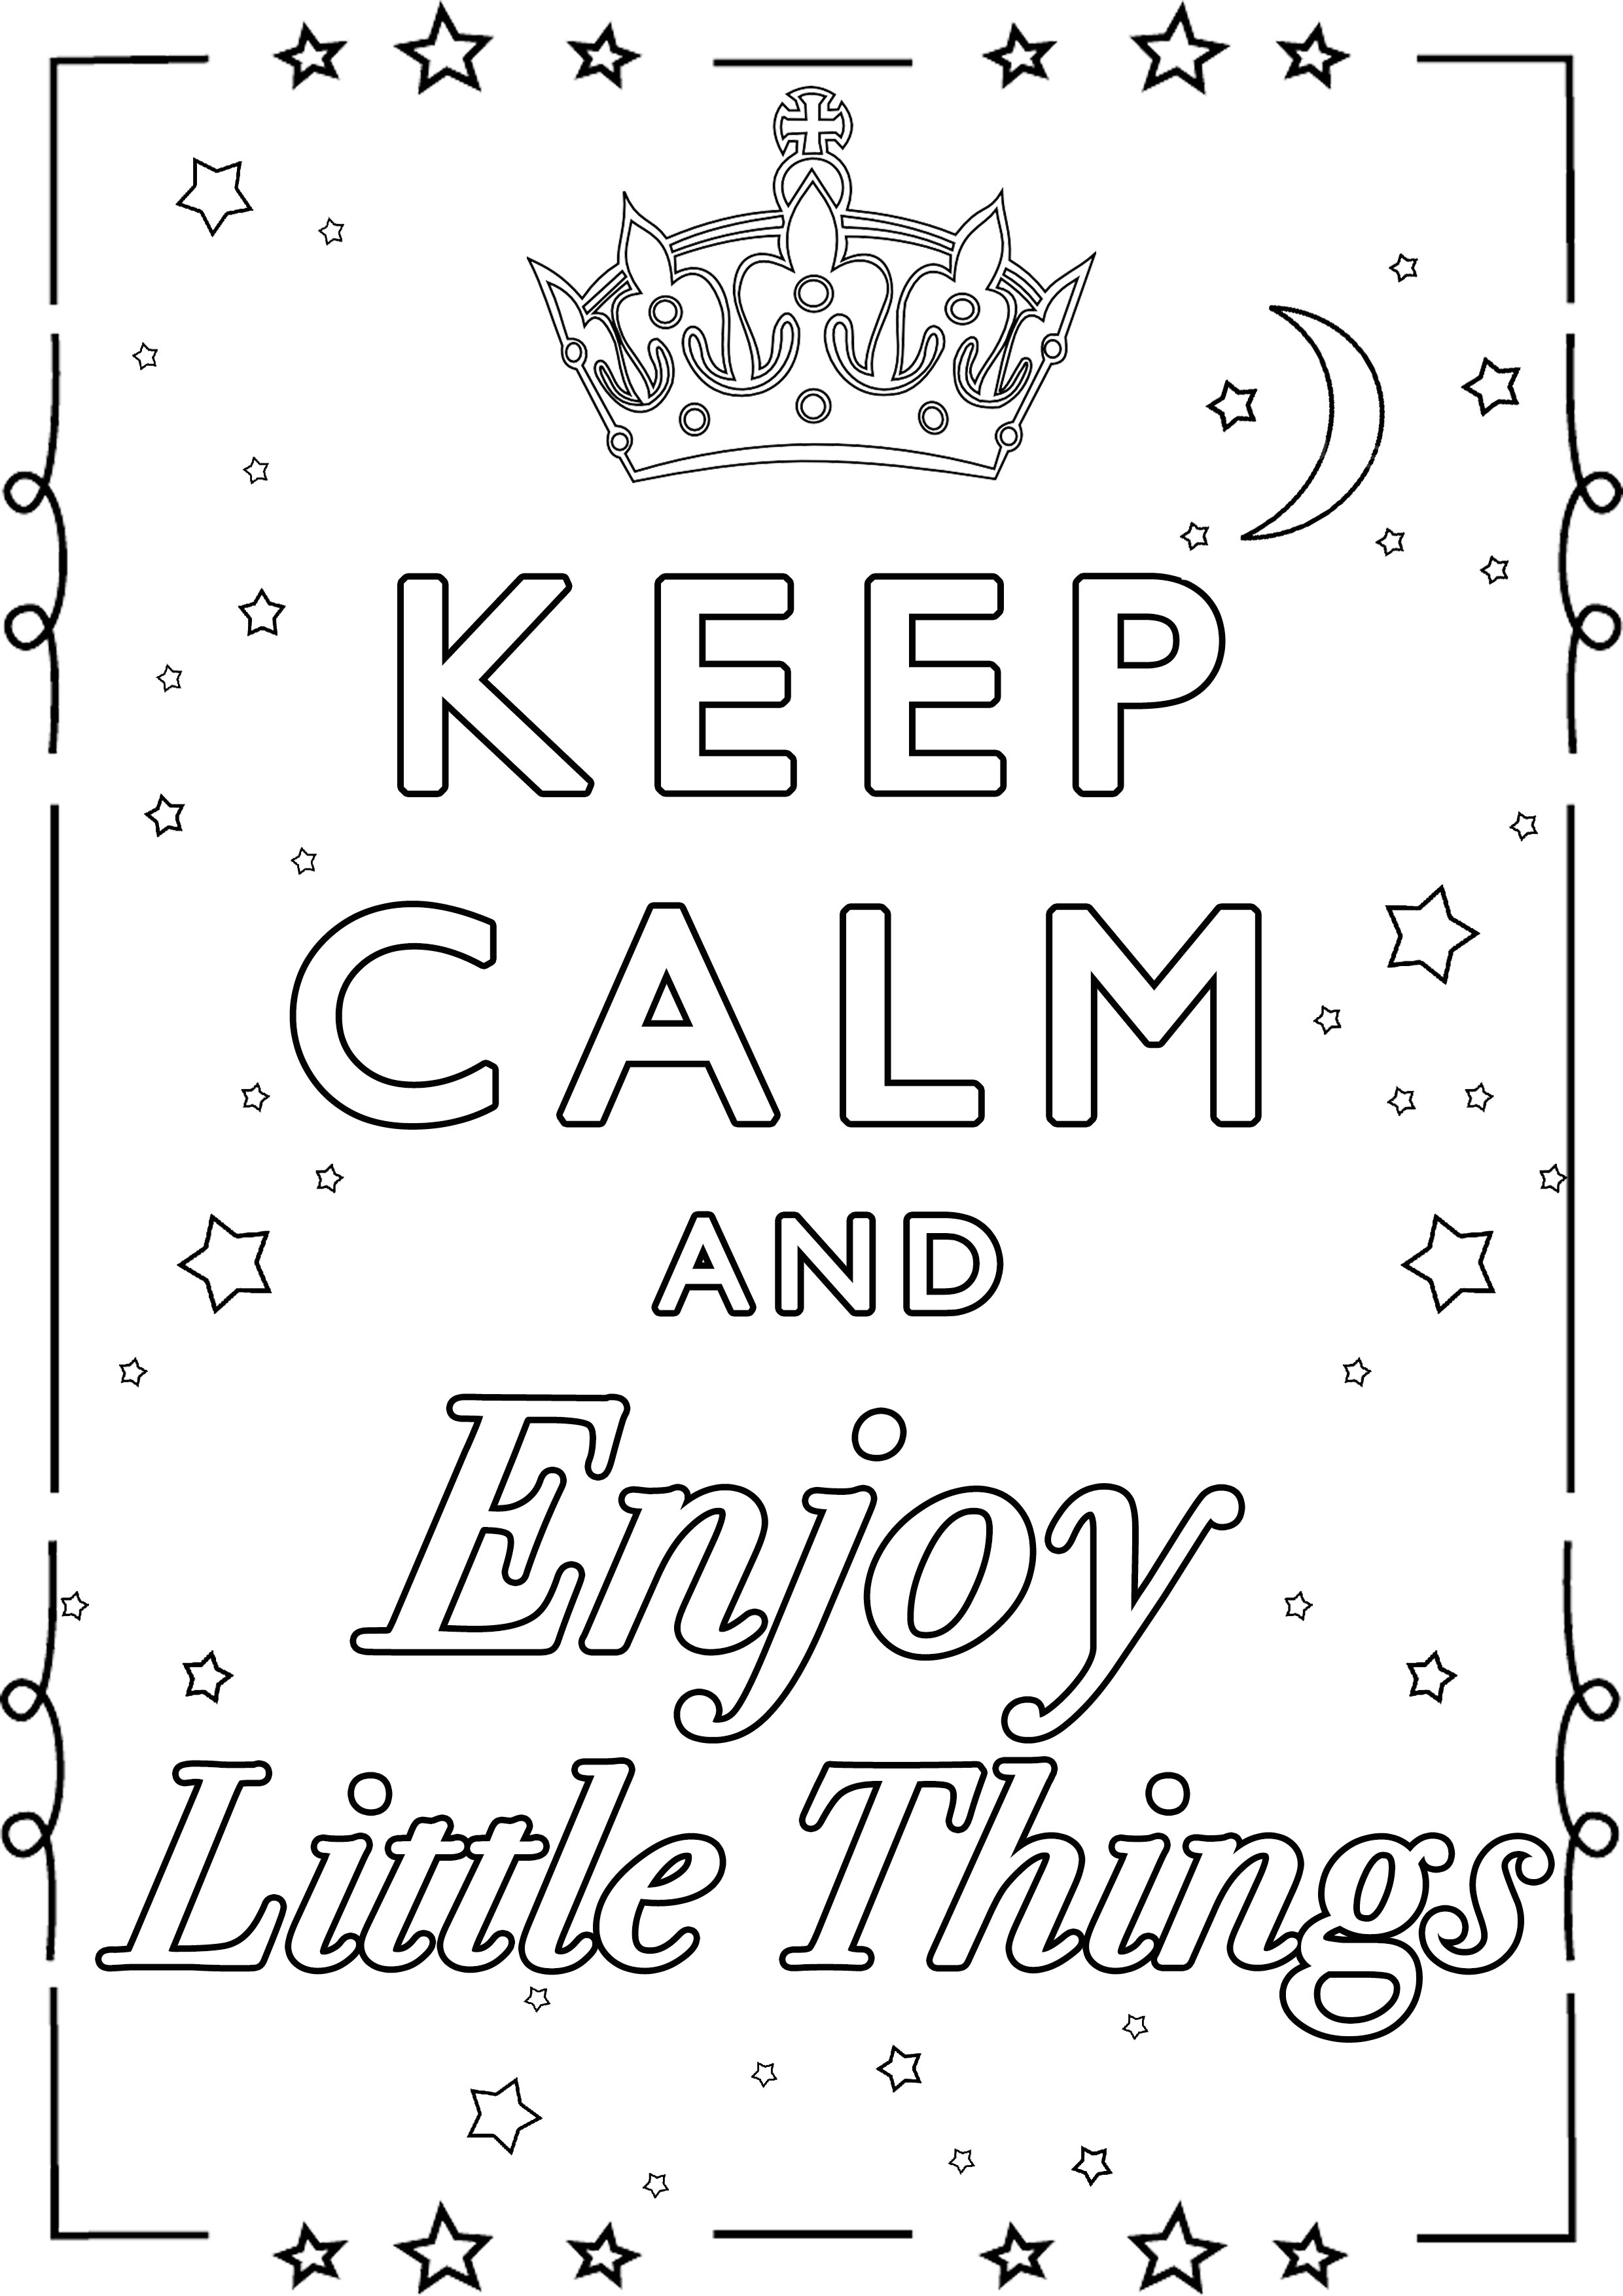 Keep calm and enjoy little things